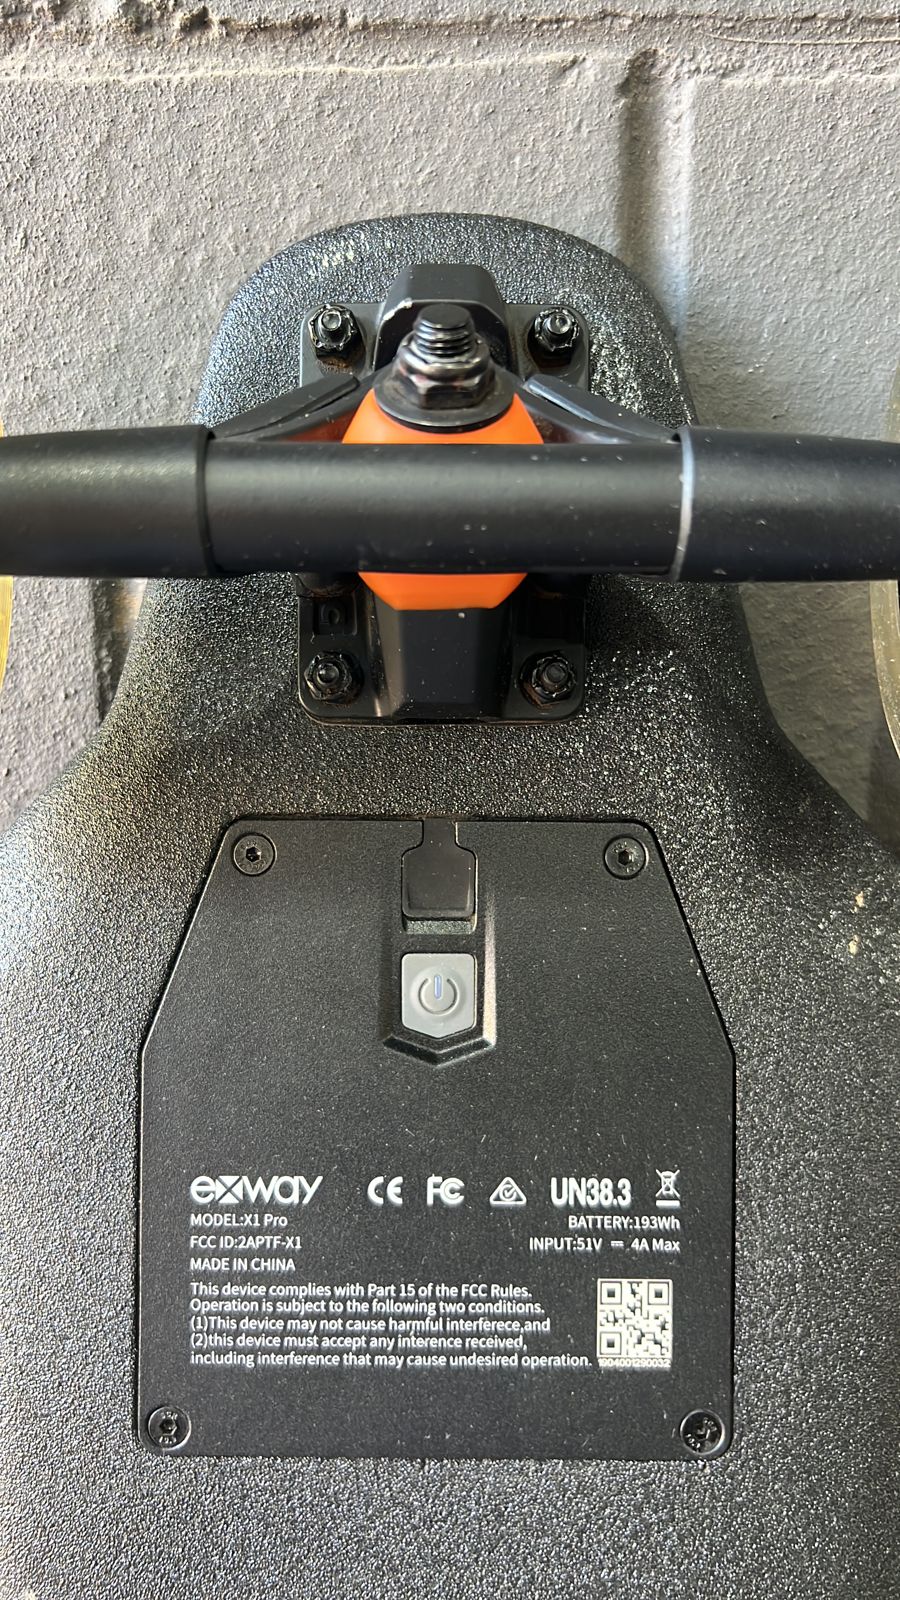 Exway X1 Pro (contact to discuss price)